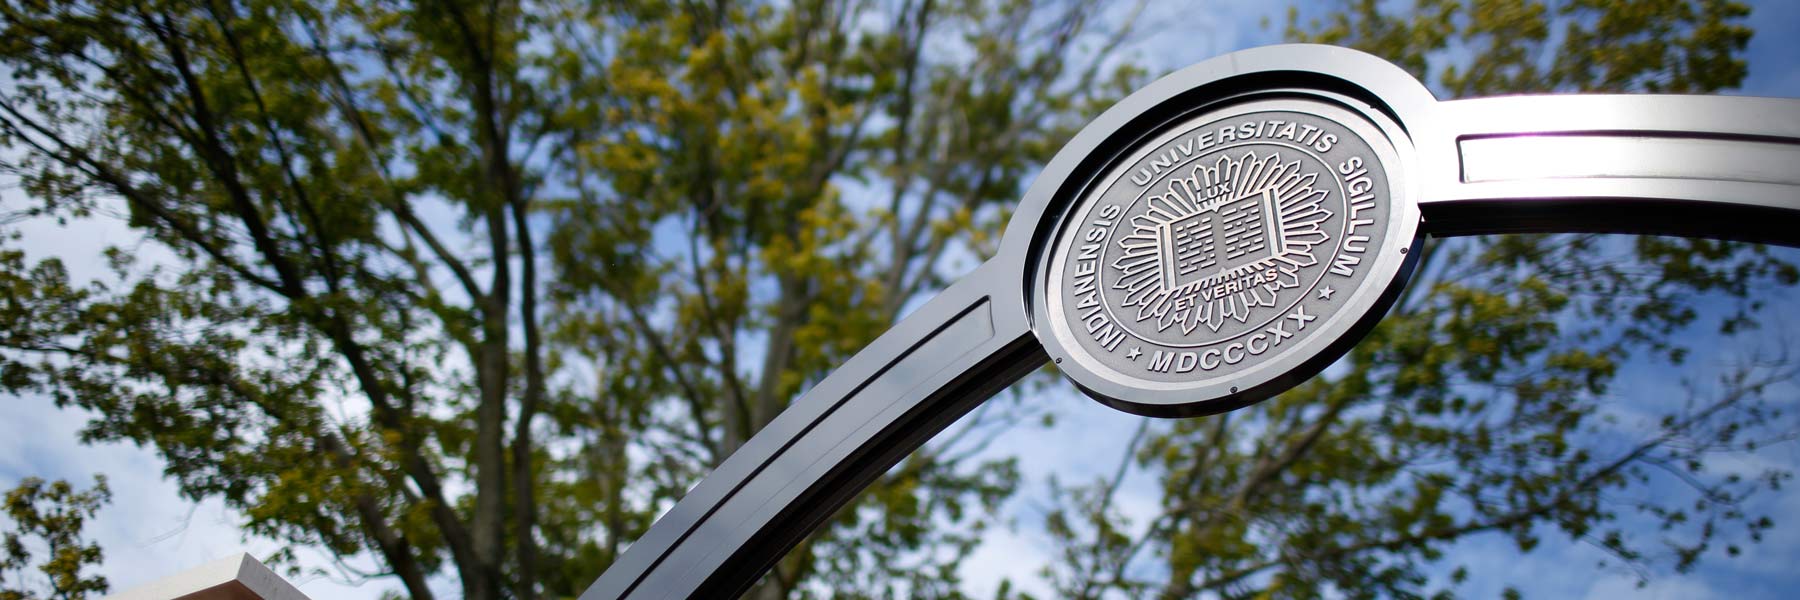 The Indiana University seal adorns a campus gateway.